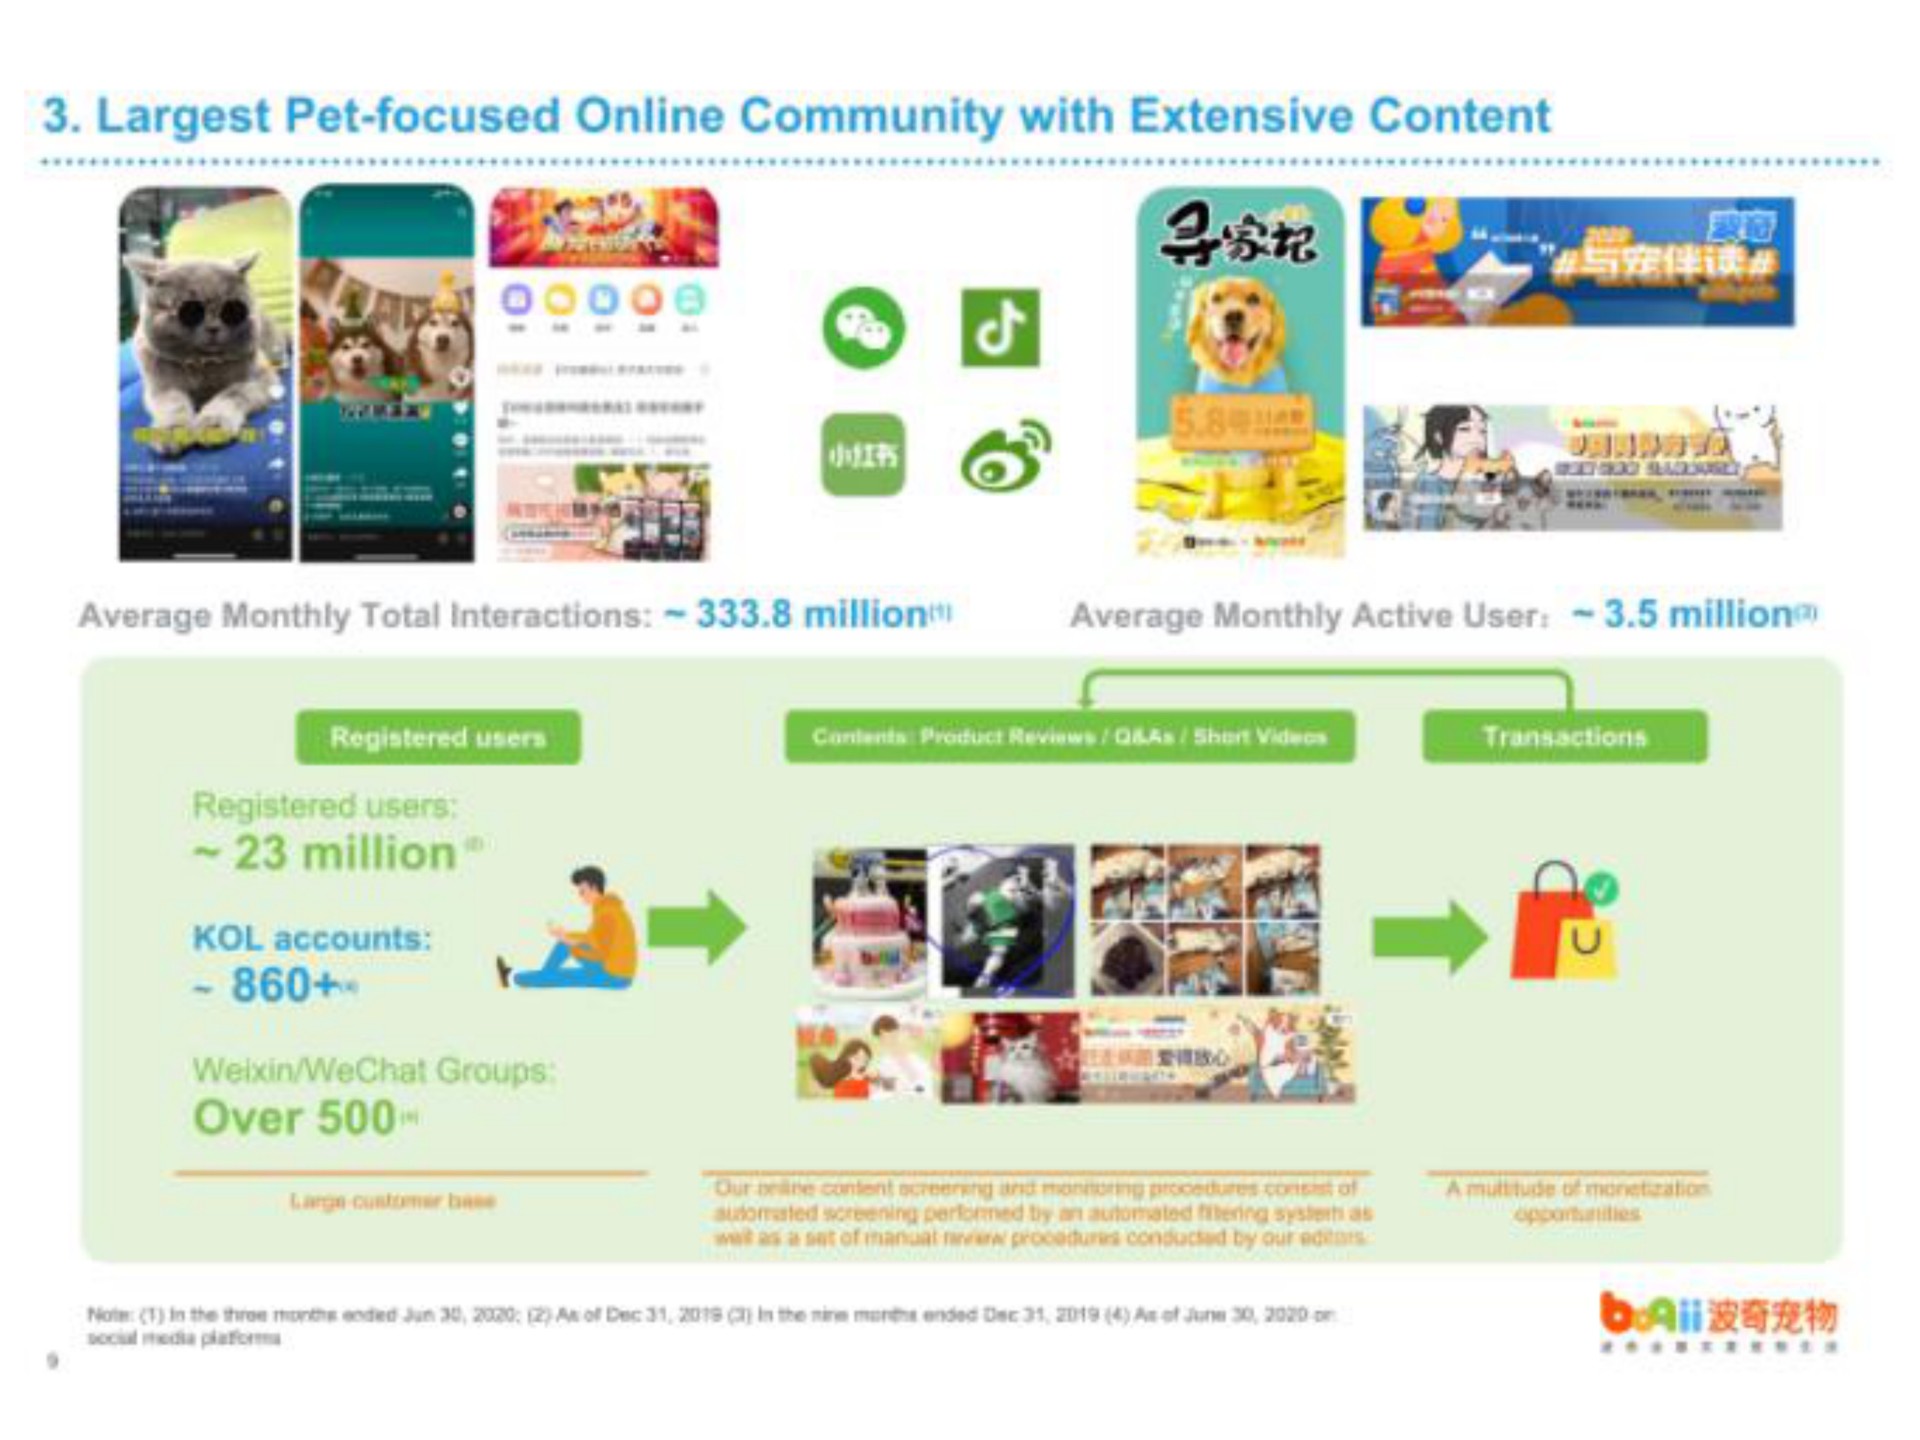 pet focused community with extensive content average monthly total interactions million average monthly active user million registered users contents reviews as short videos million accounts a over | Boqii Holding